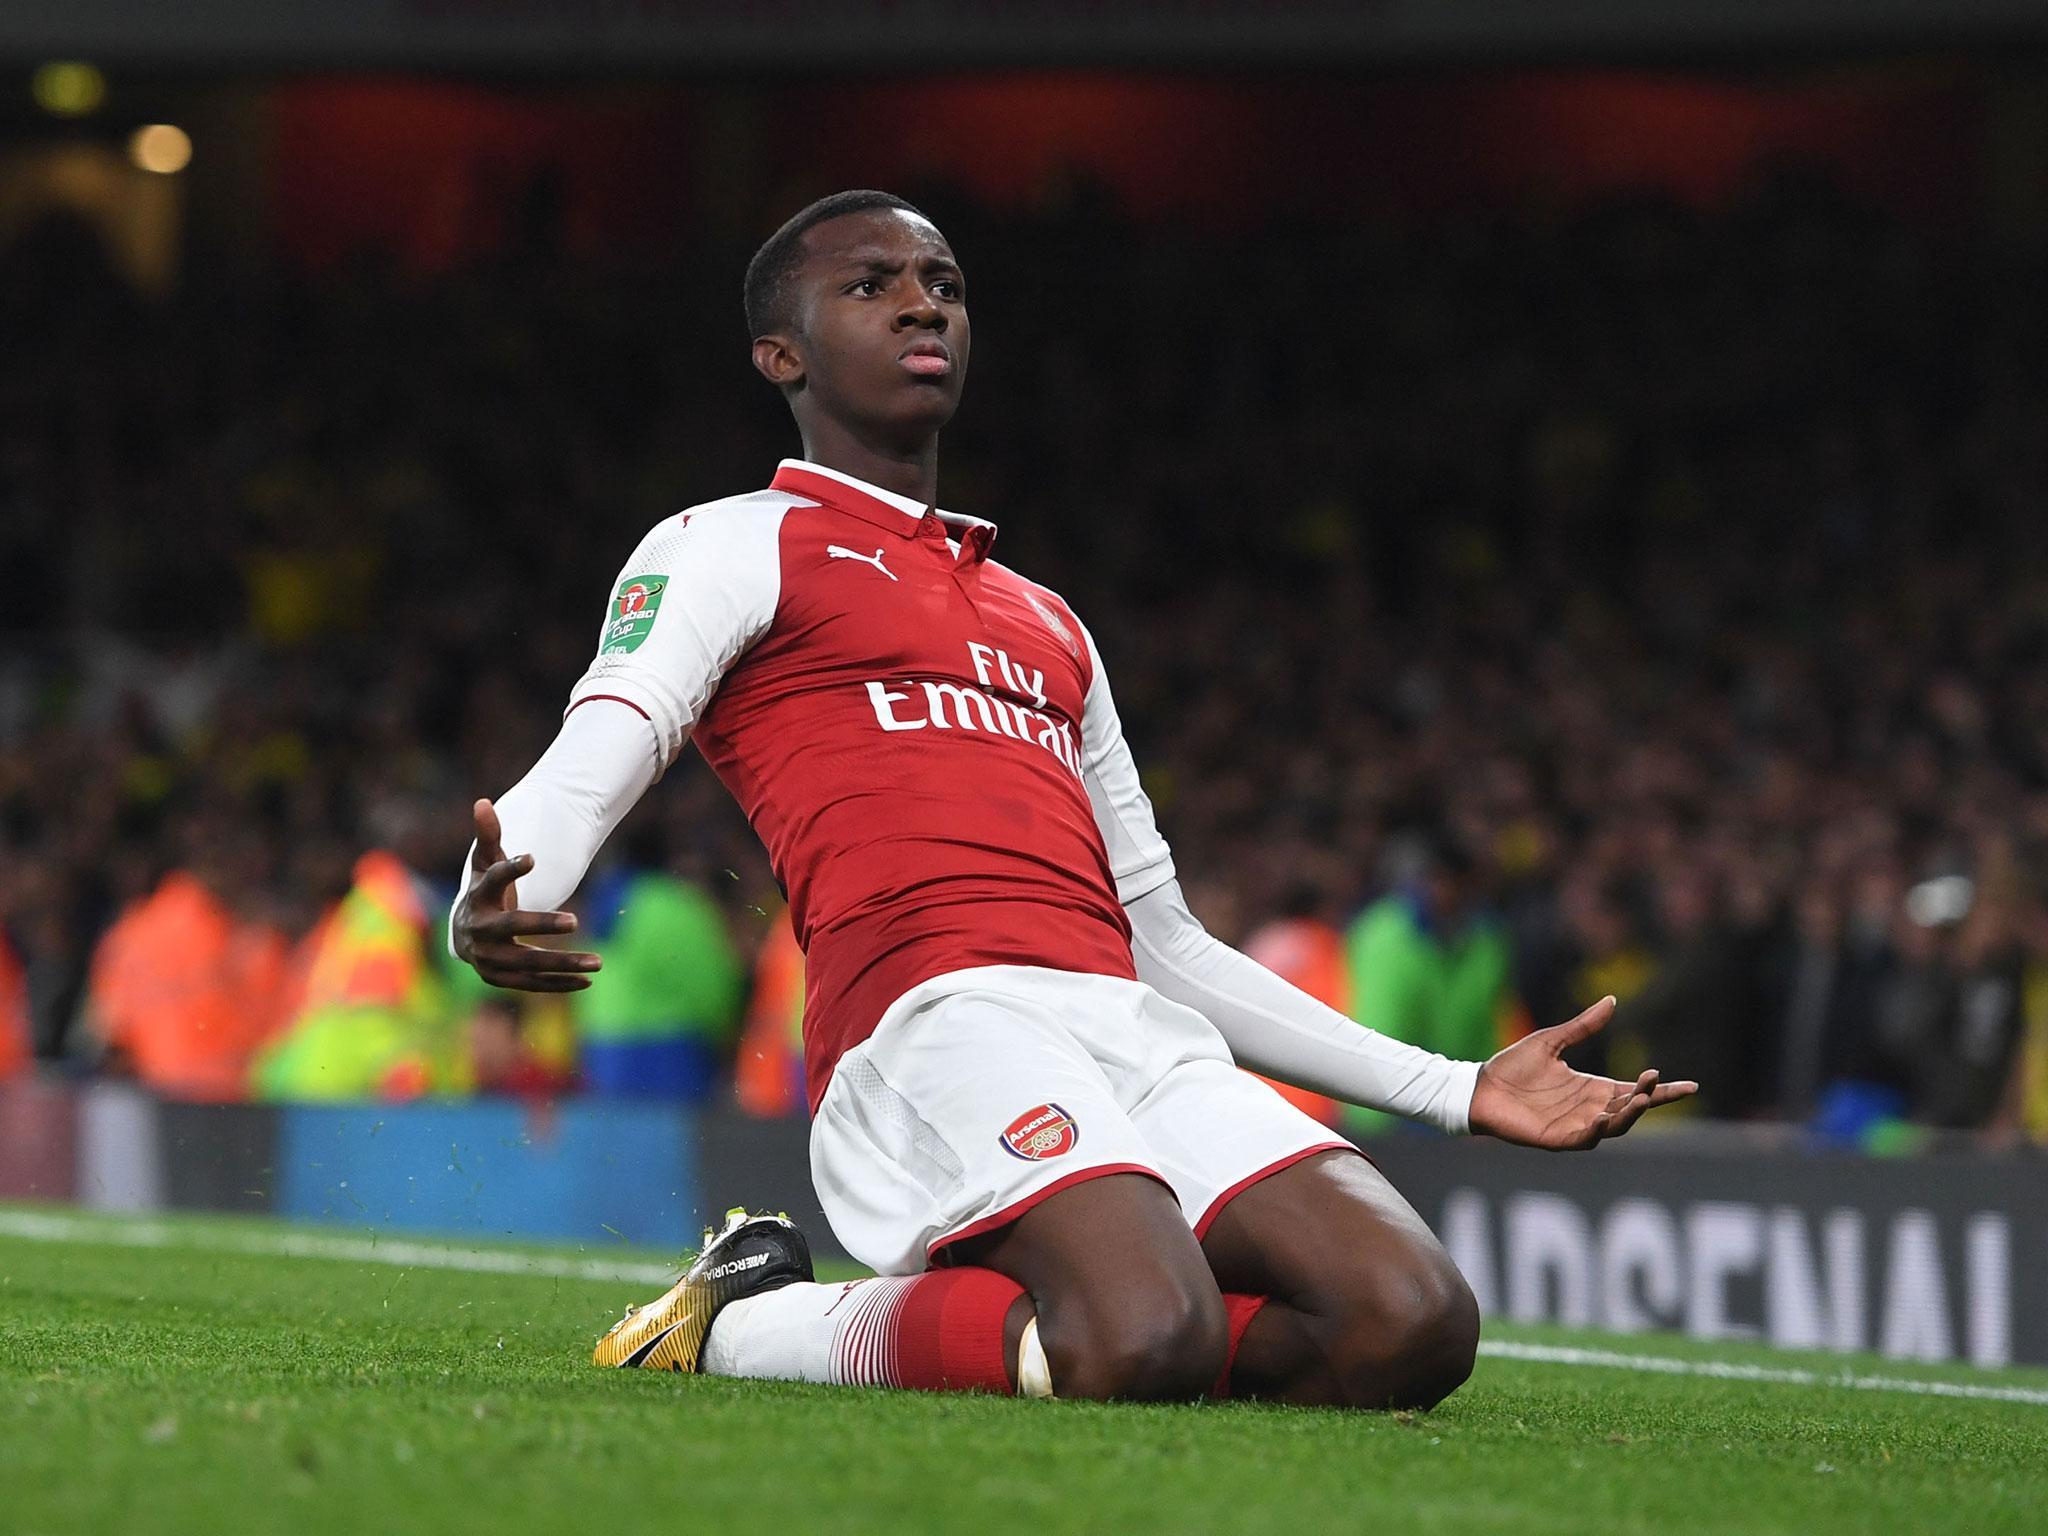 Eddie Nketiah climbed off the bench to save Arsenal in fairytale fashion